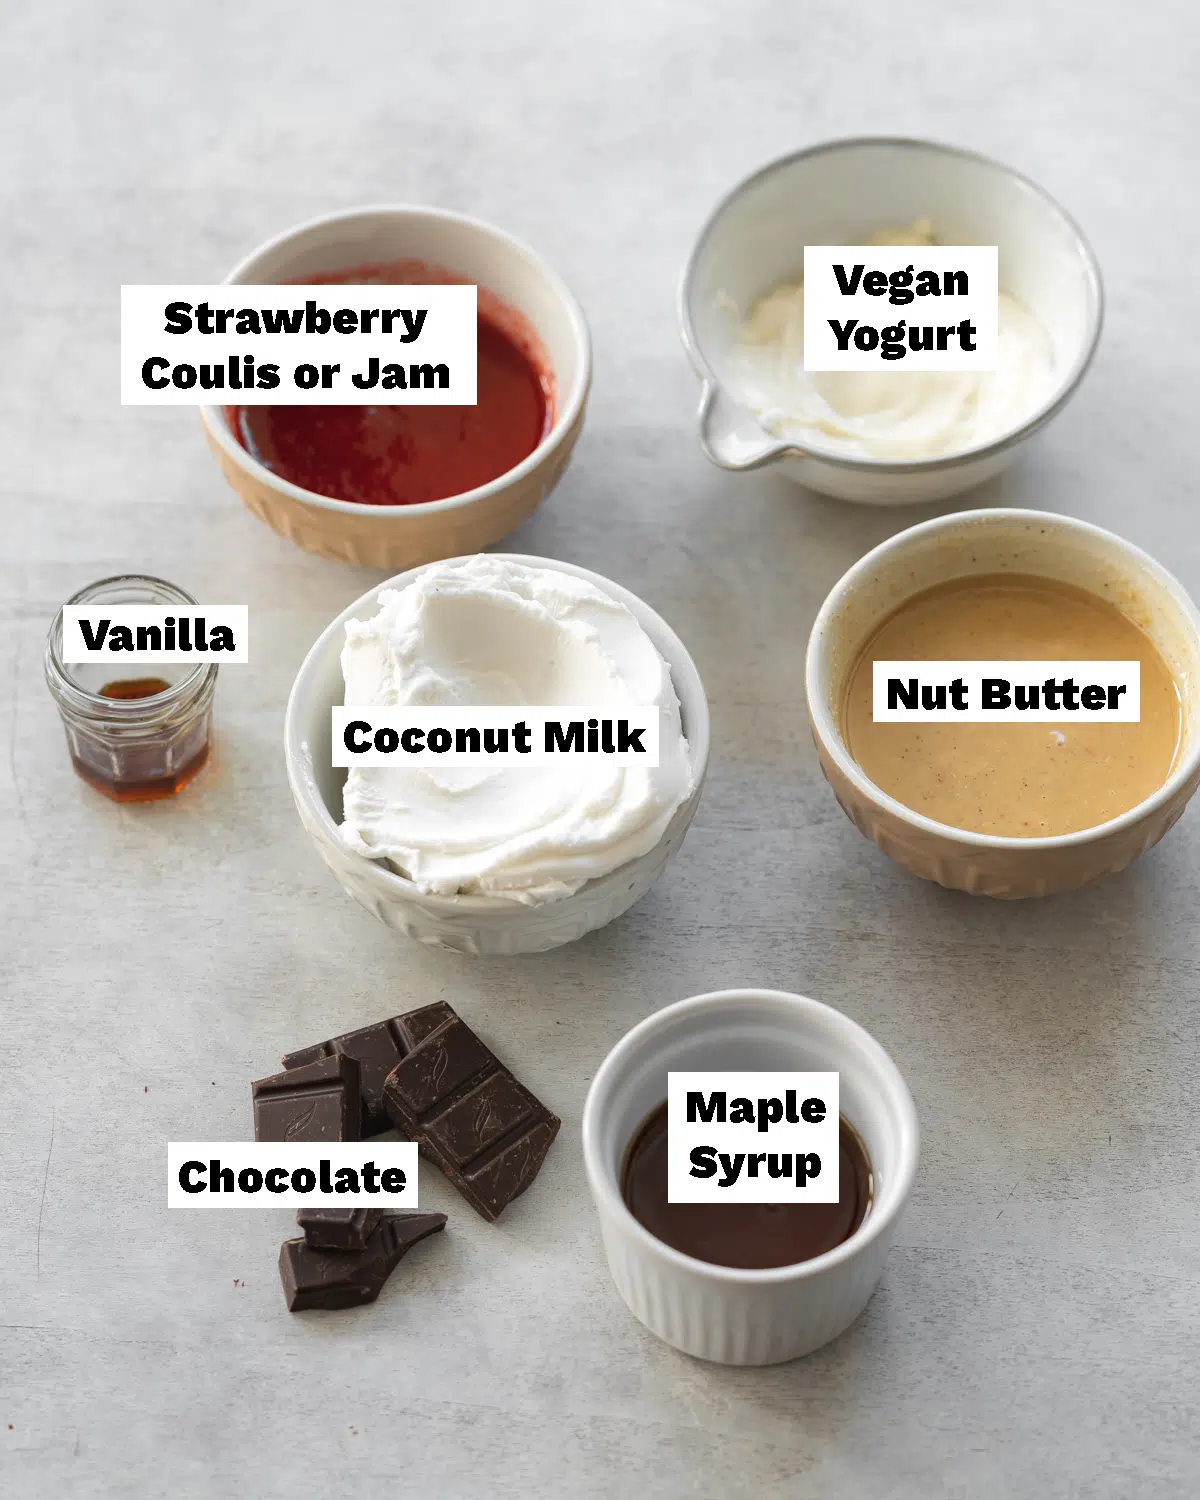 ingredients for vegan magnum ice creams measured out in bowls.